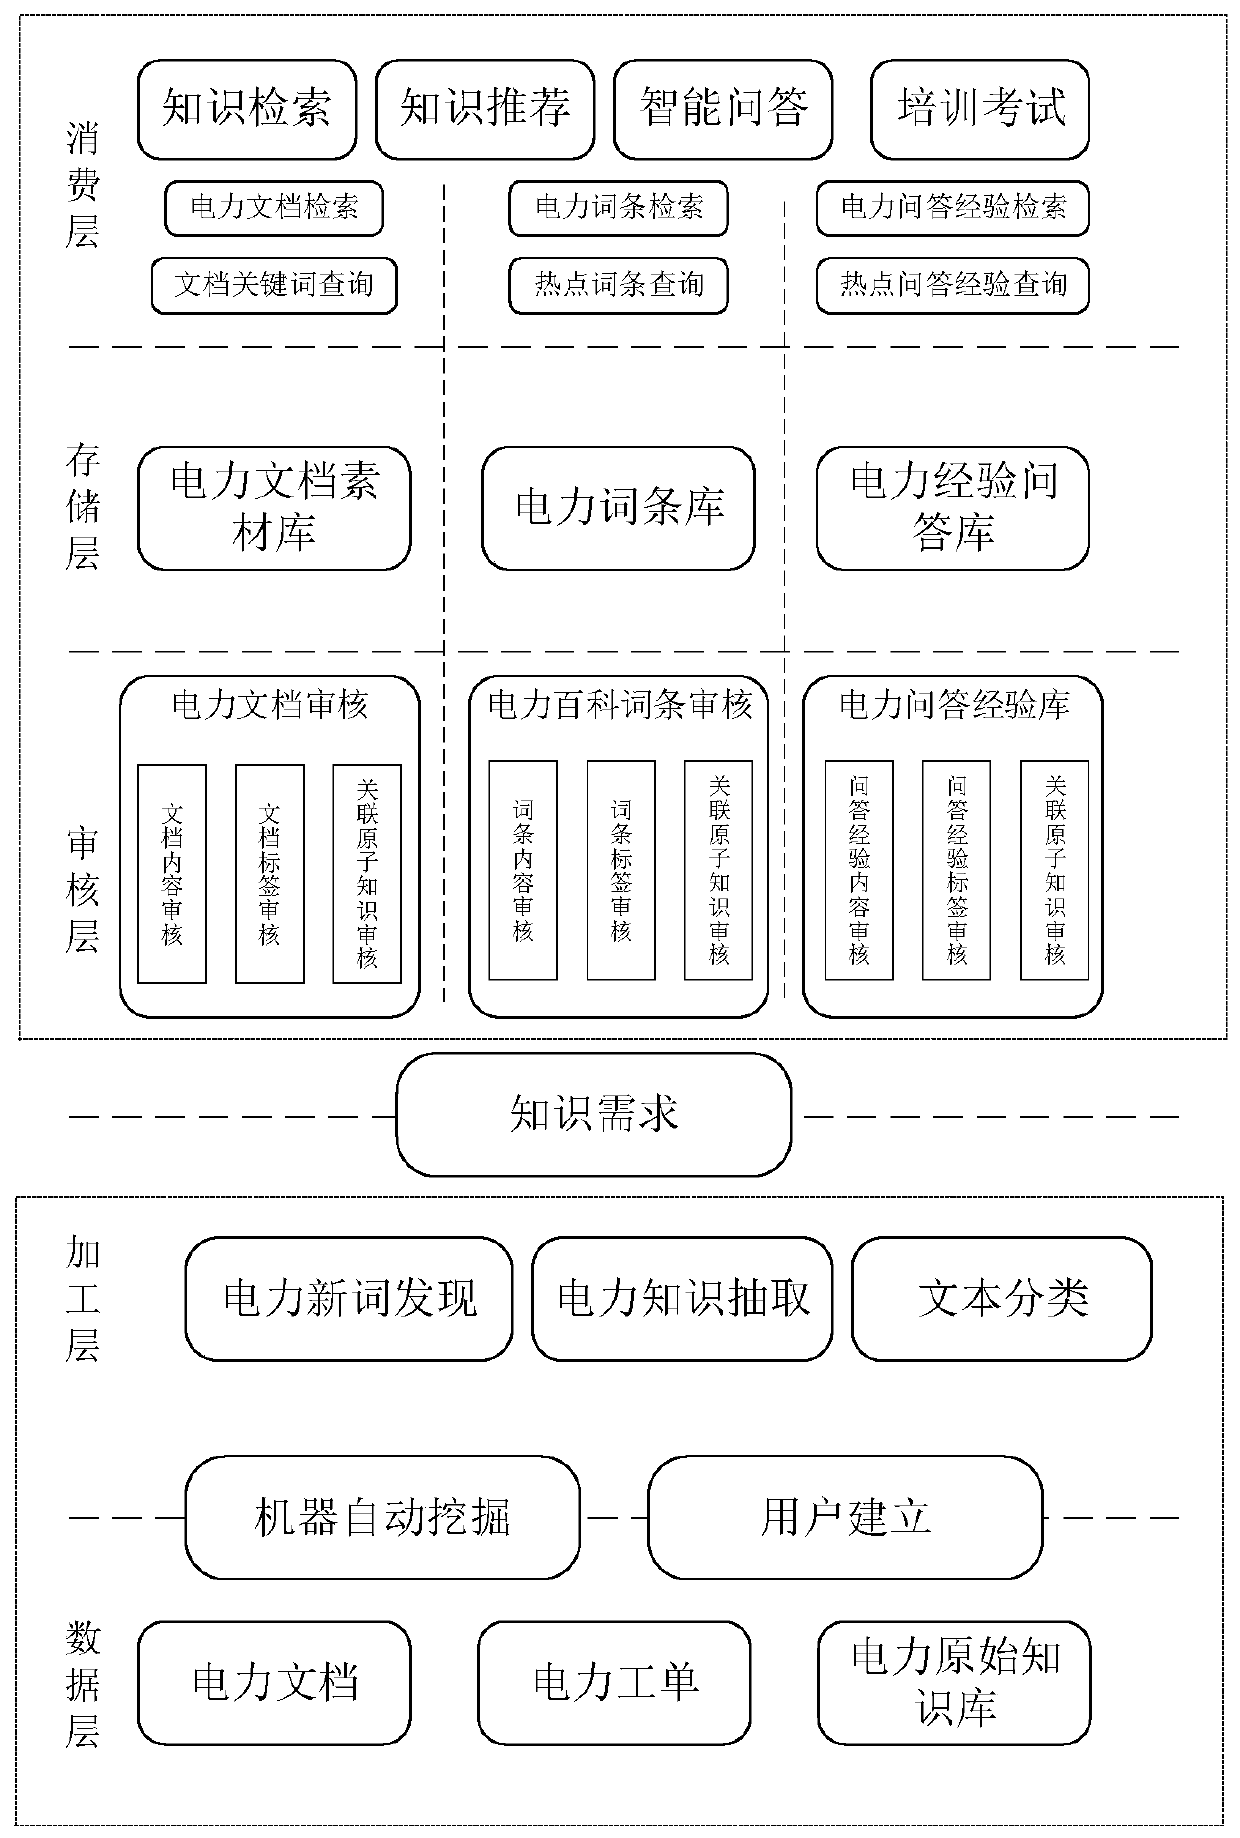 Electric power marketing knowledge system platform and application method